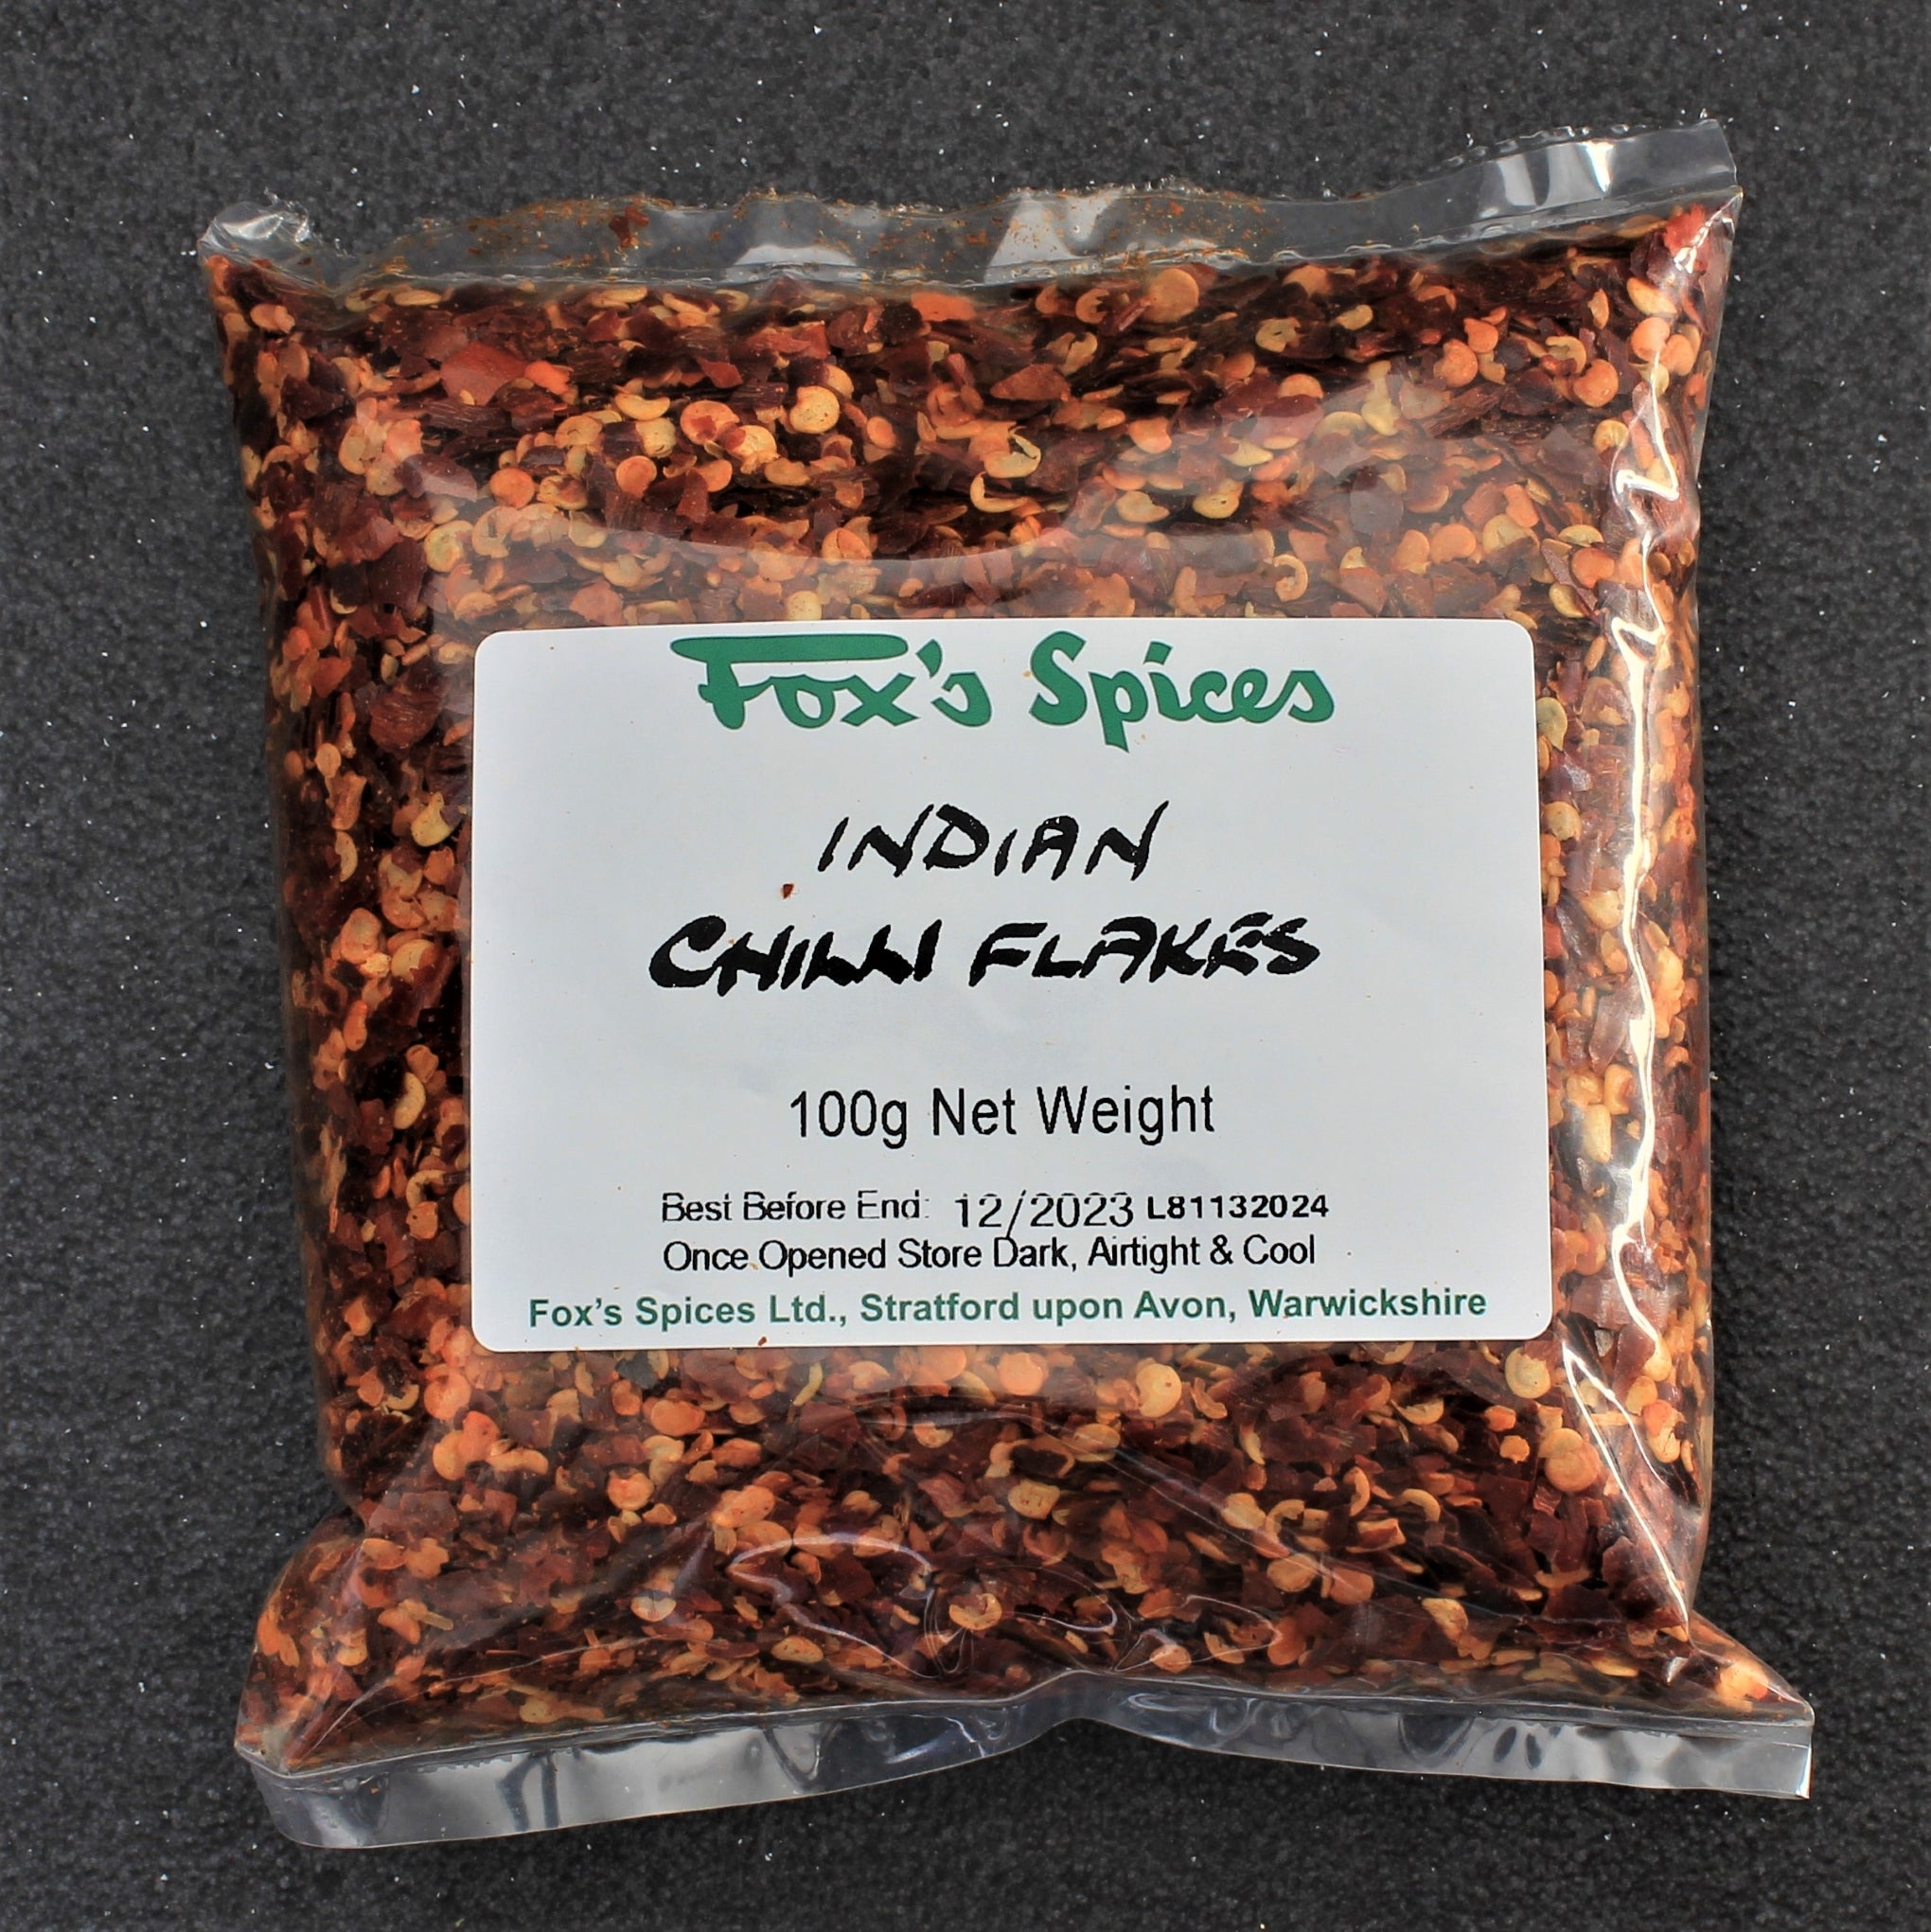 A 100g bag of chilli flakes from Fox's Spices.